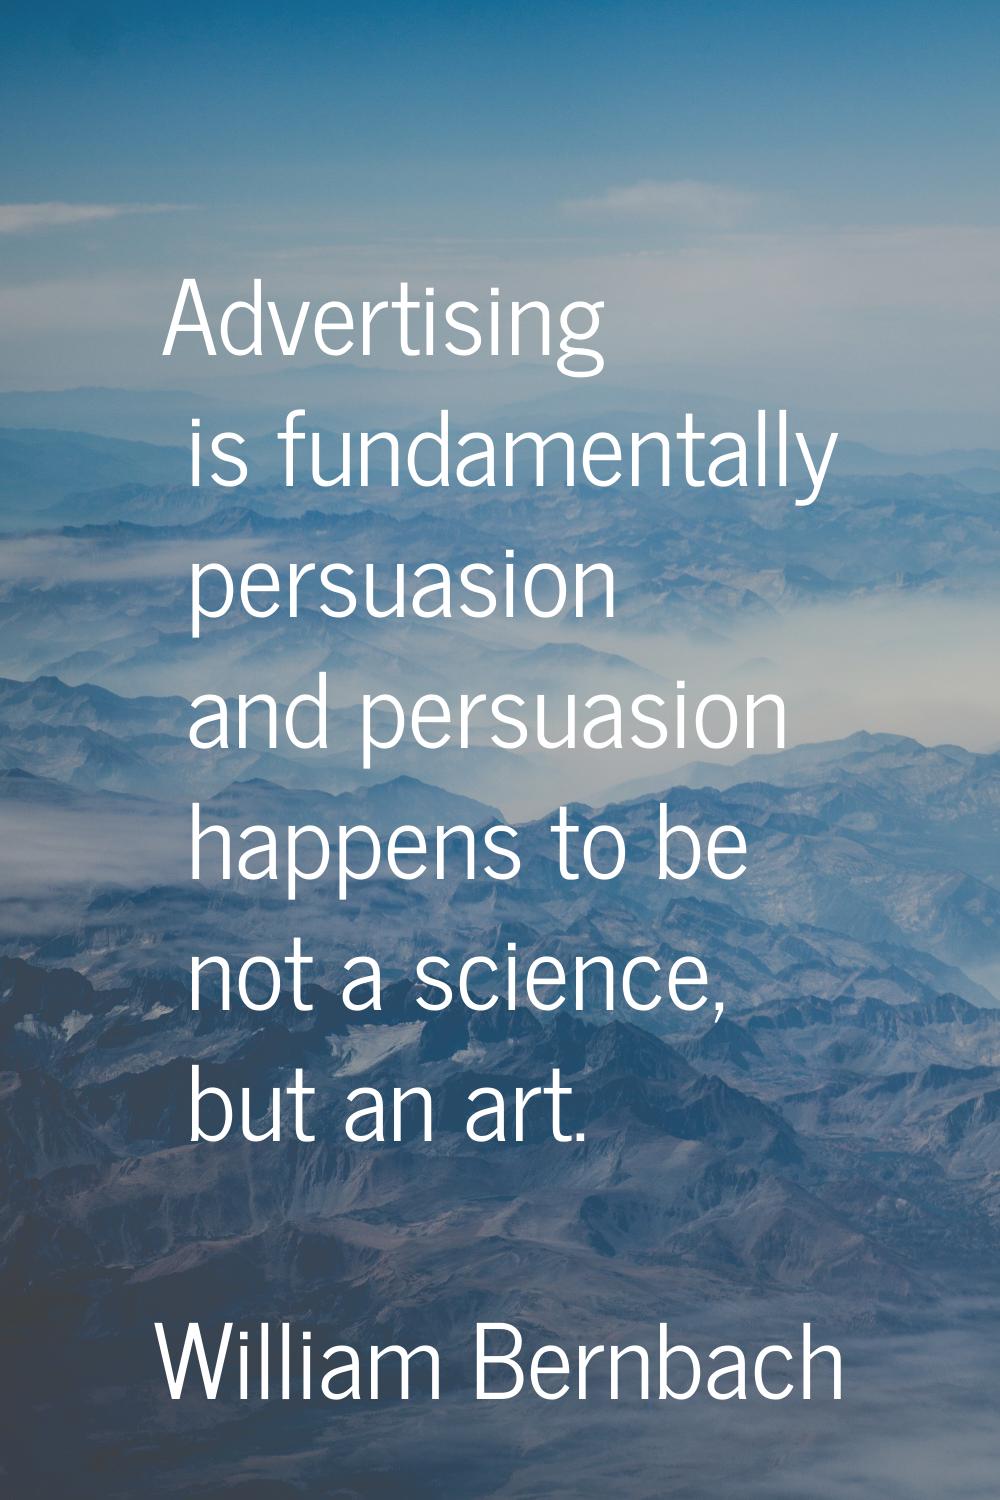 Advertising is fundamentally persuasion and persuasion happens to be not a science, but an art.